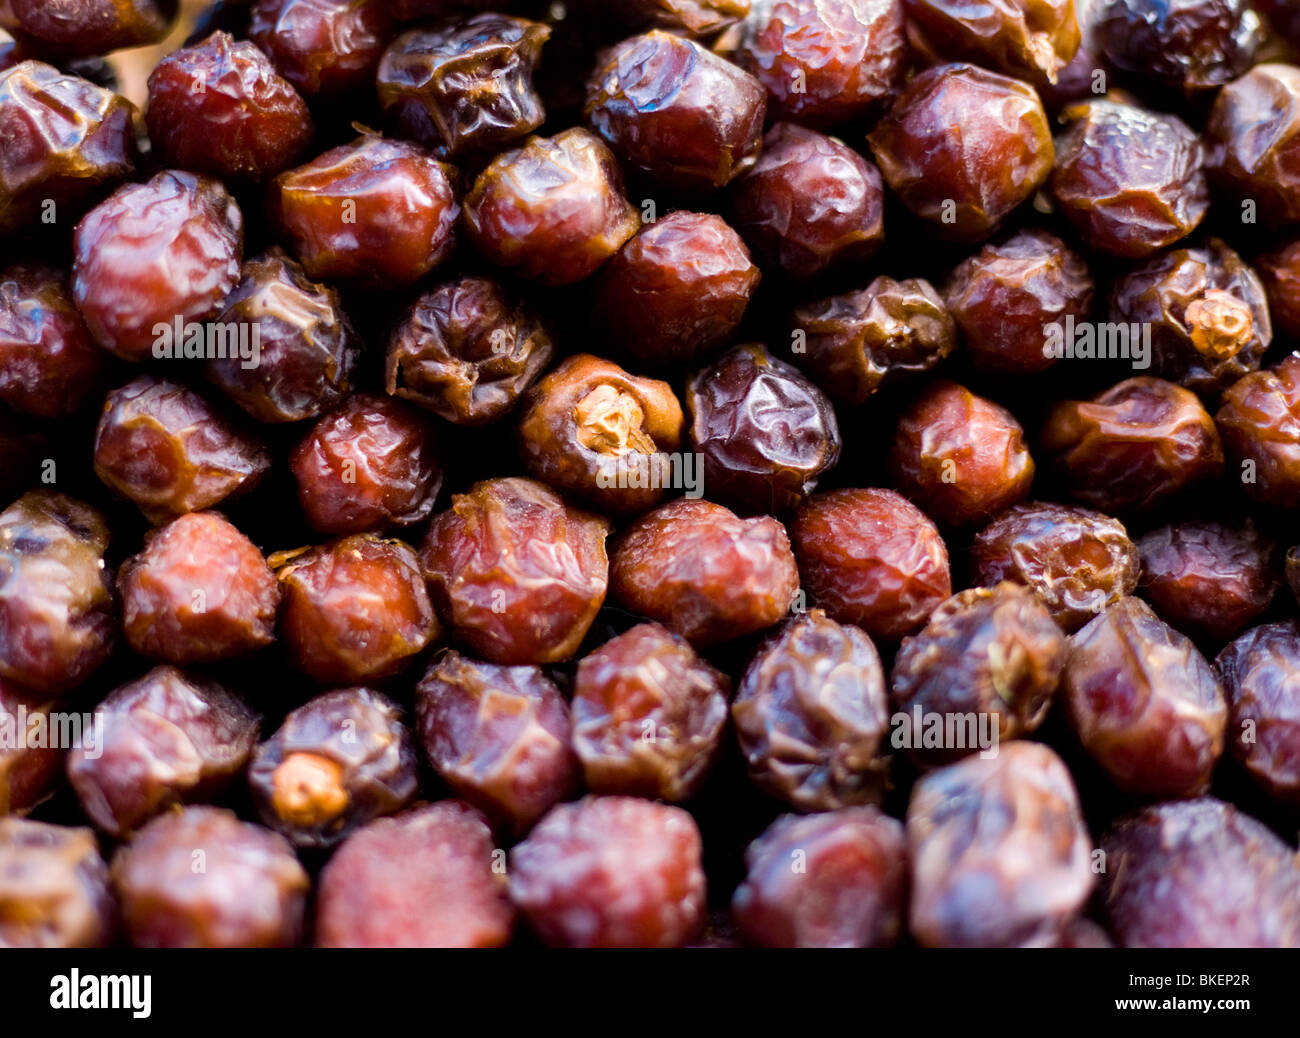 Dates on sale at a market in Istanbul, Turkey. Stock Photo